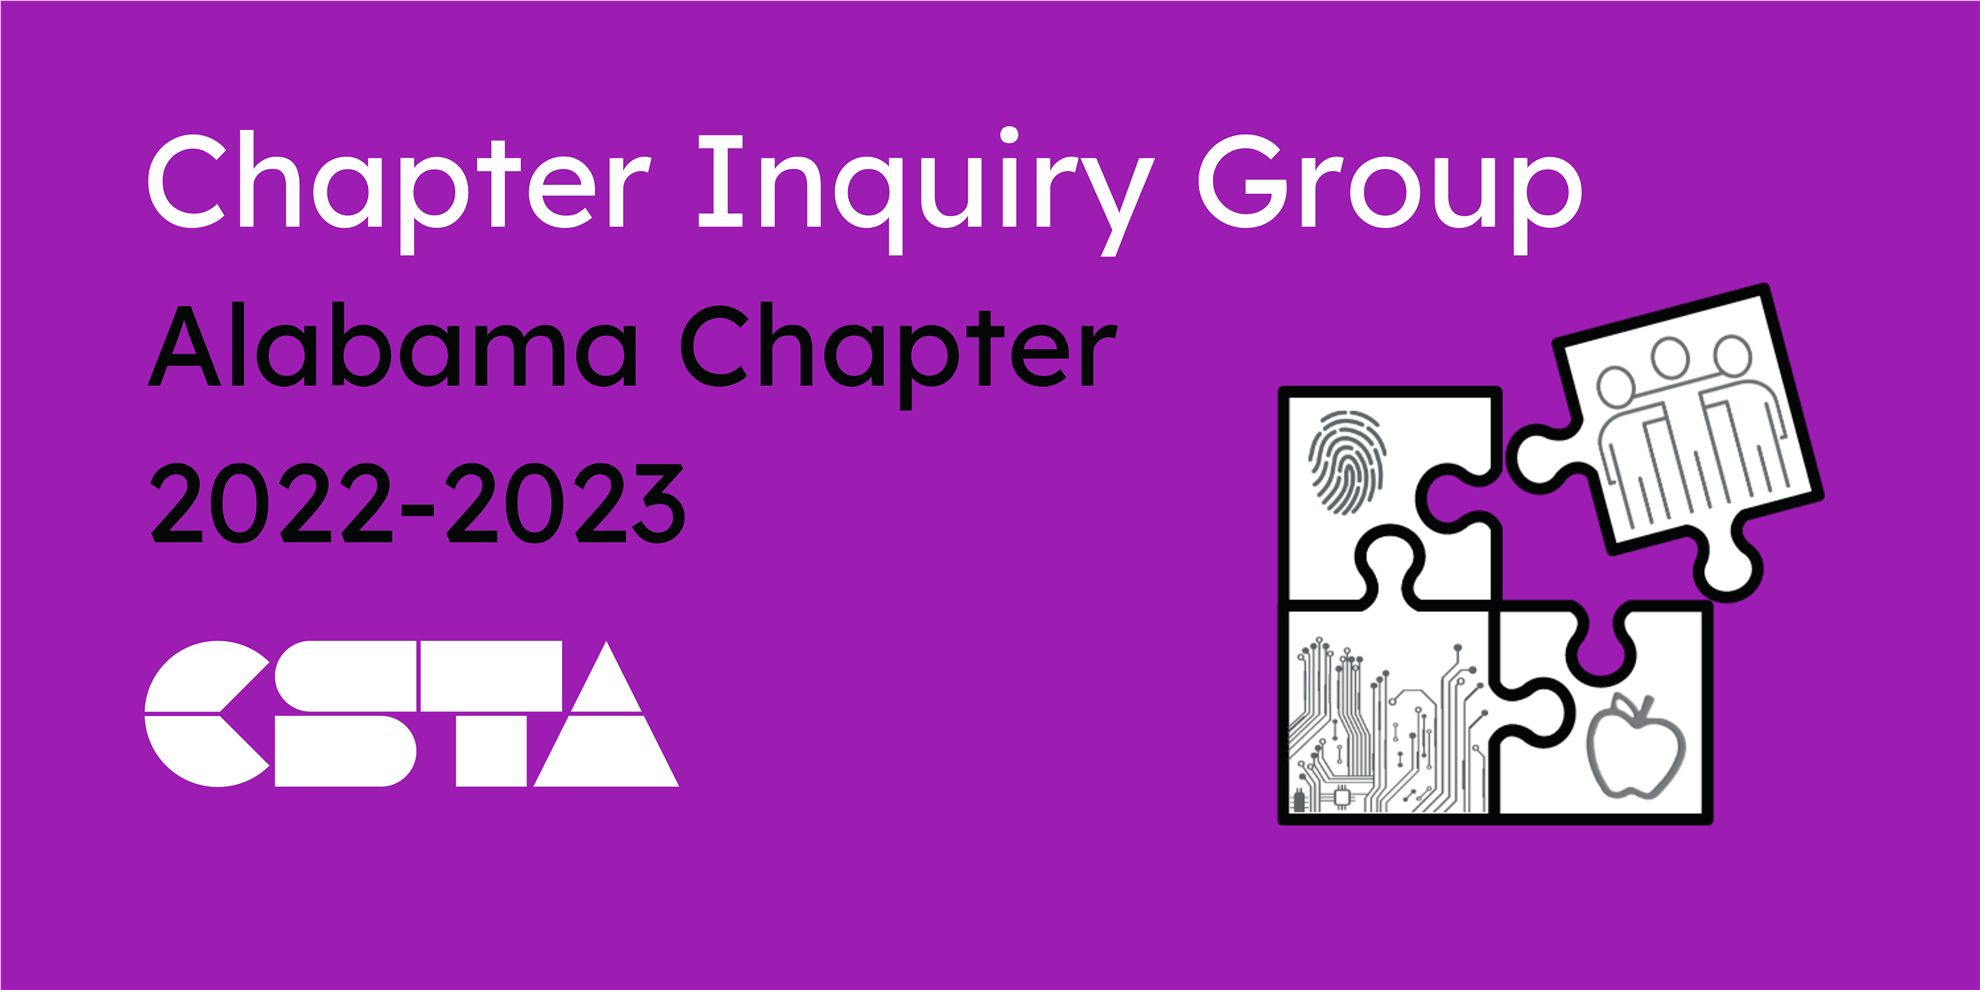 Chapter Inquiry Group logo